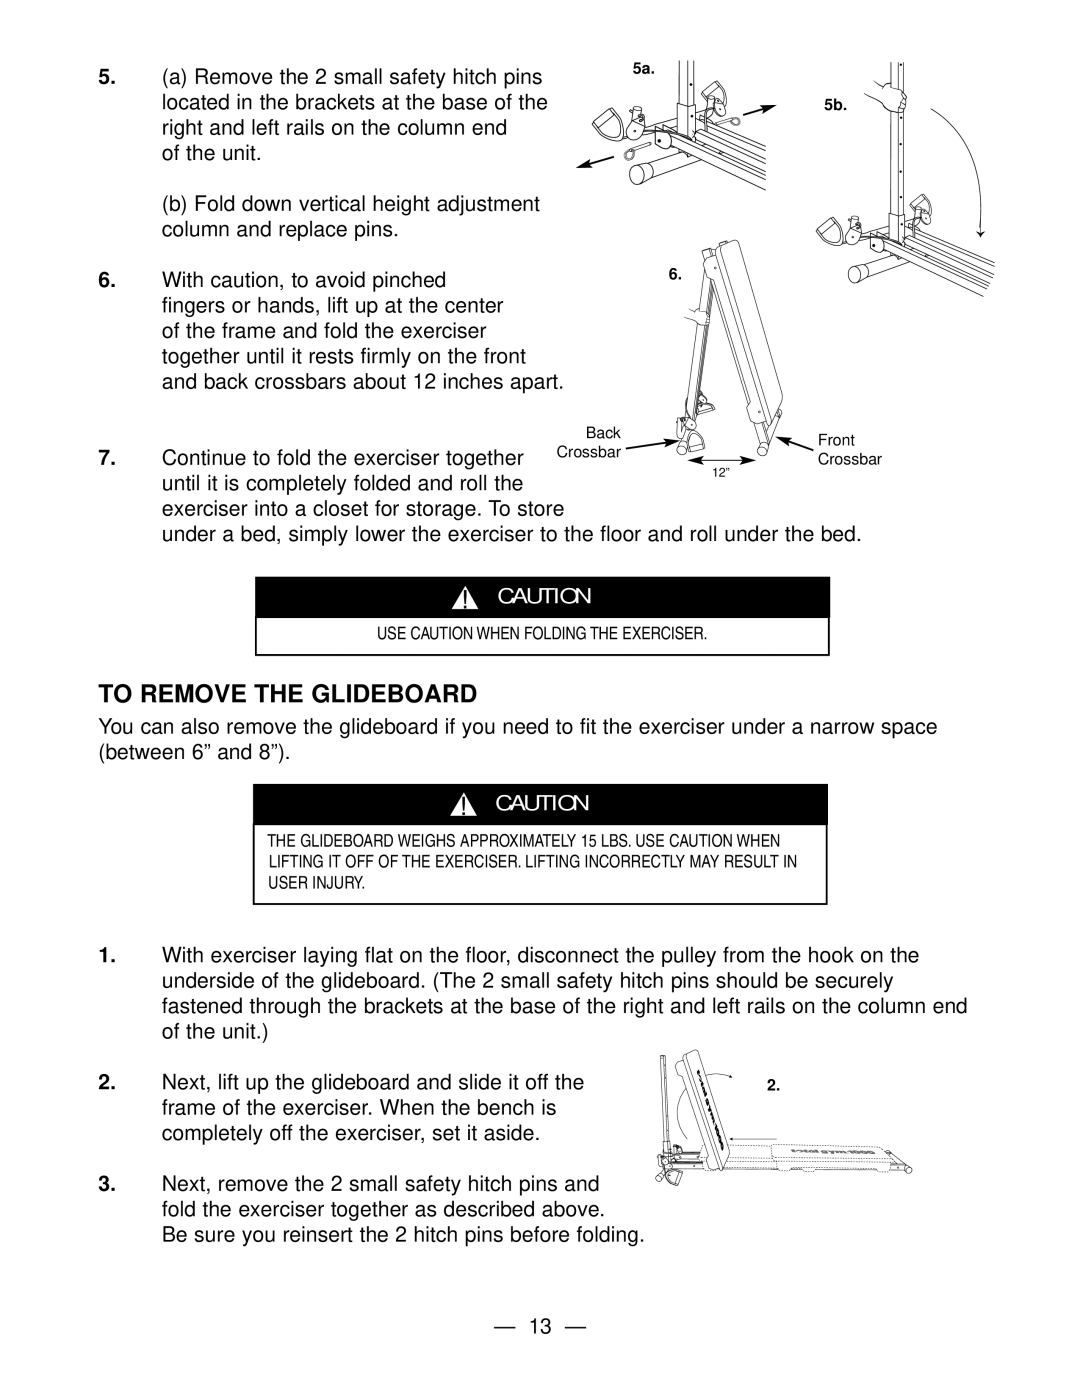 Fitness Quest Gym1000 manual To Remove The Glideboard 